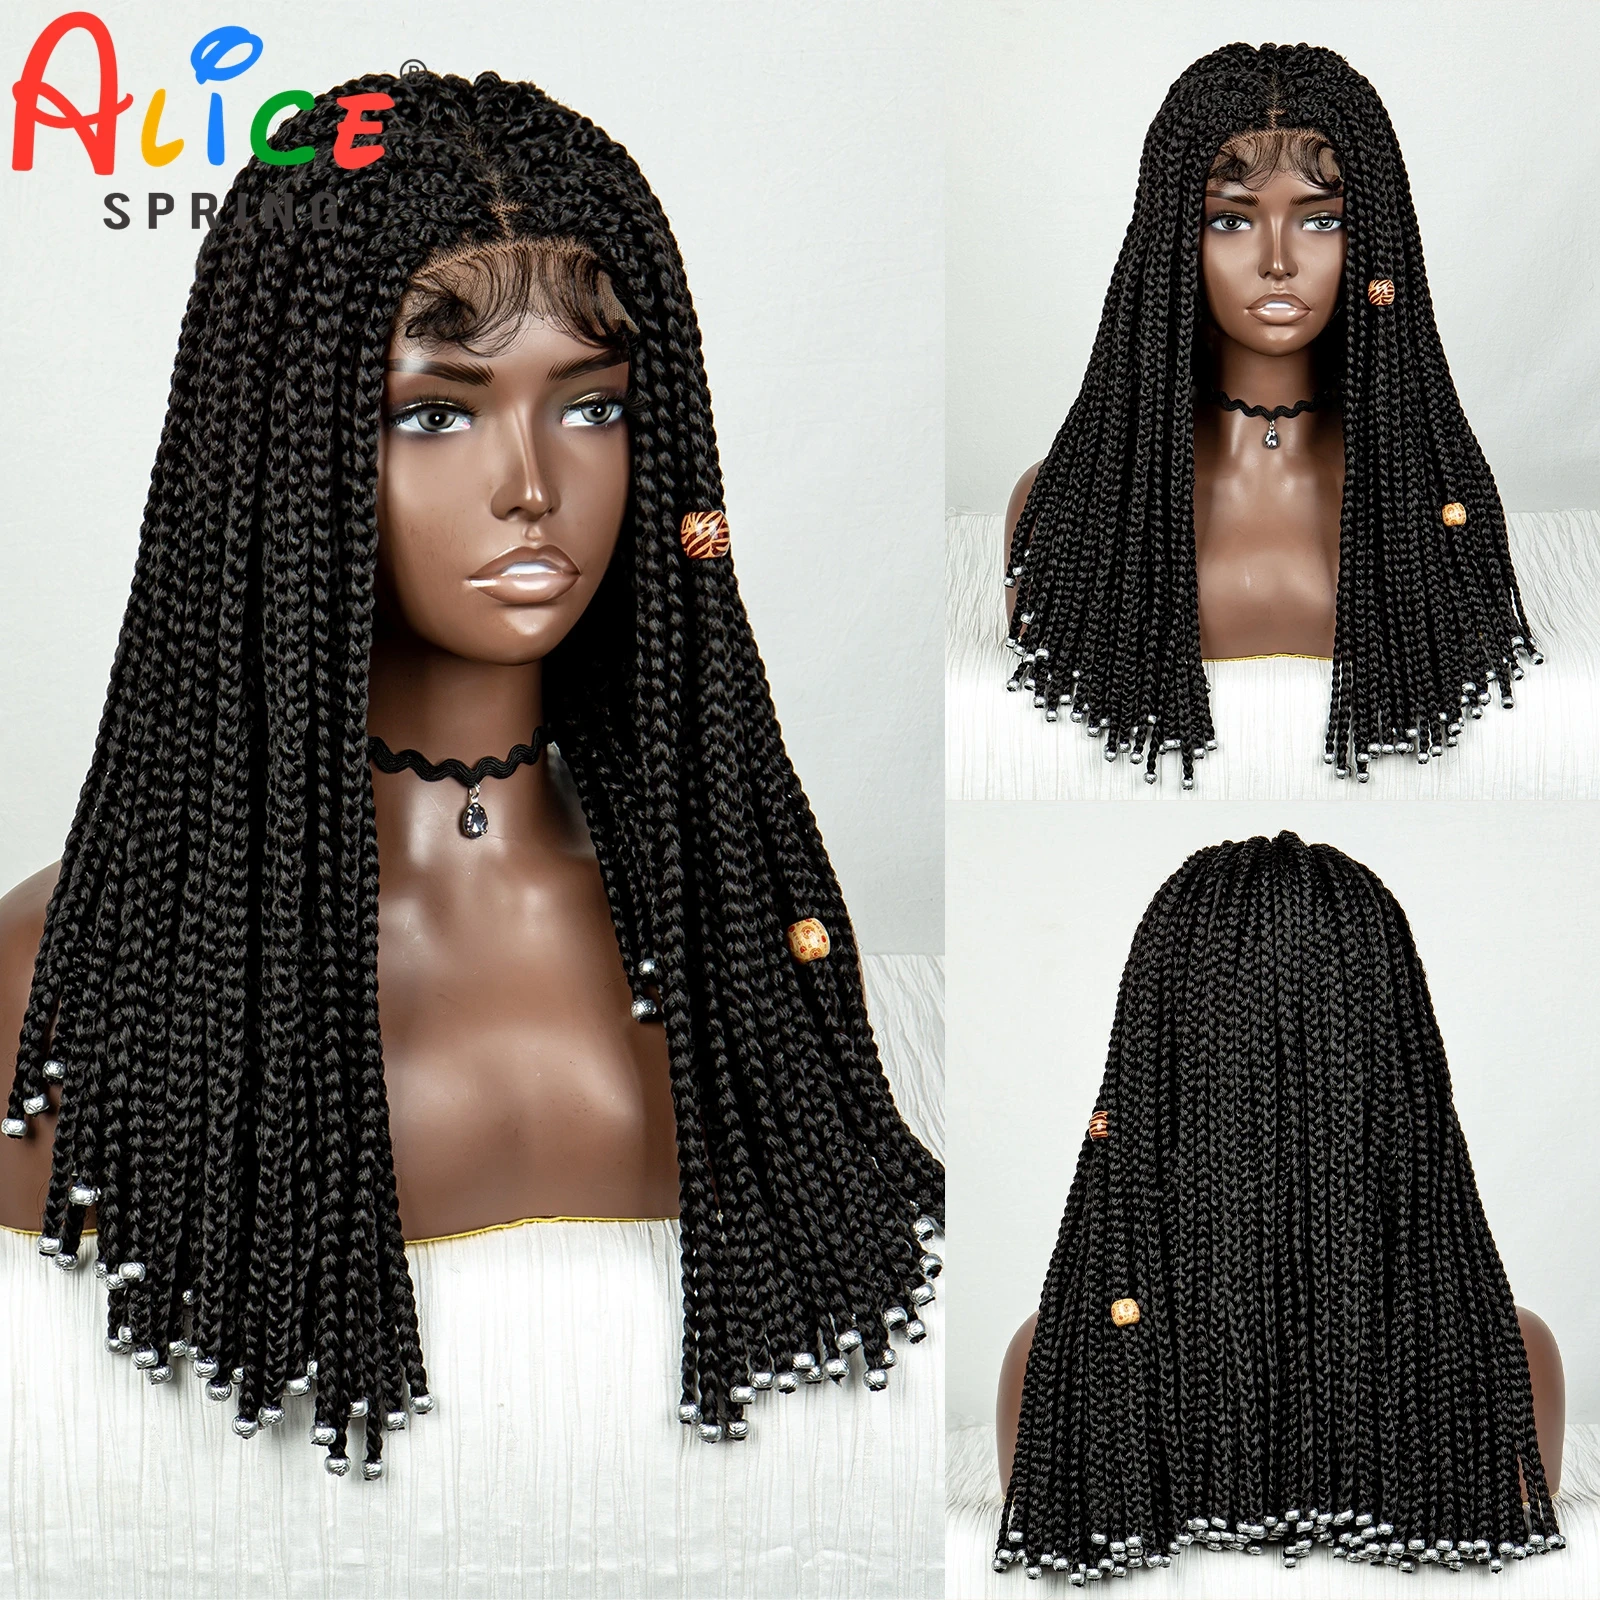 

Short Straight Bob Synthetic Lace Braided Wigs for Women Cornrow Box Braid Wig with Beads Handmade Lace Braiding Hair Wigs